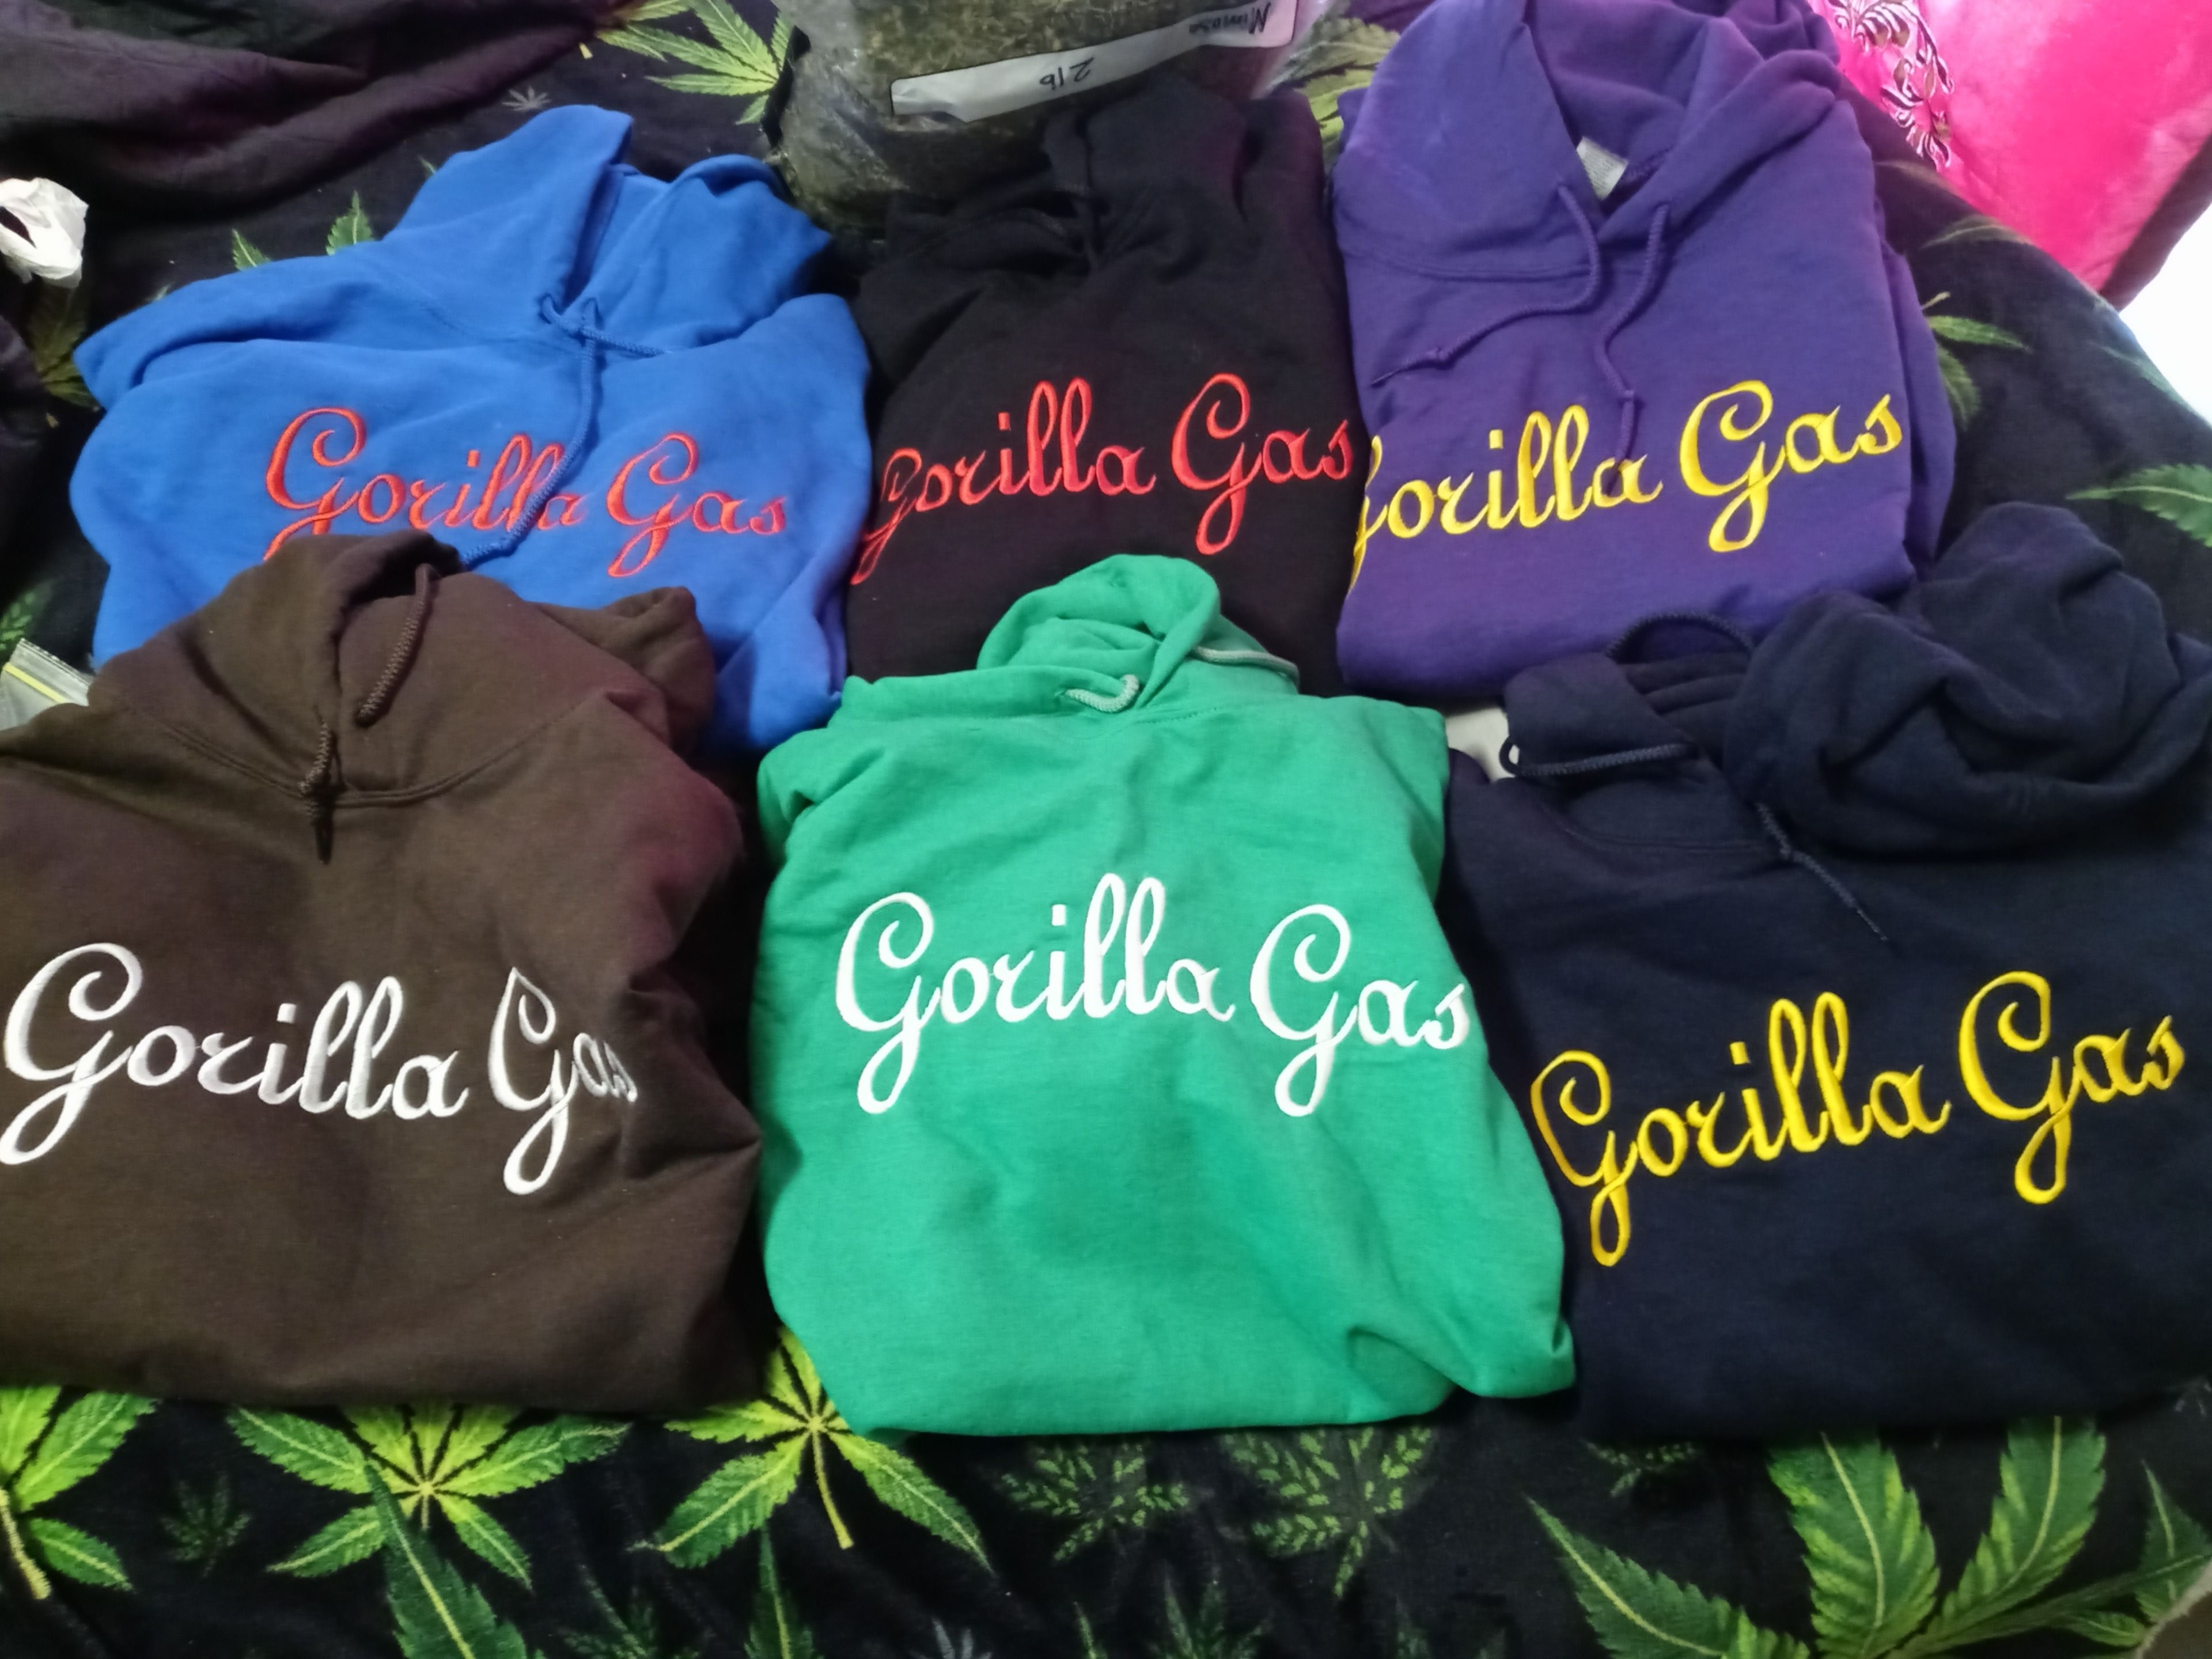 Gorilla Gas Clothing and Accessories